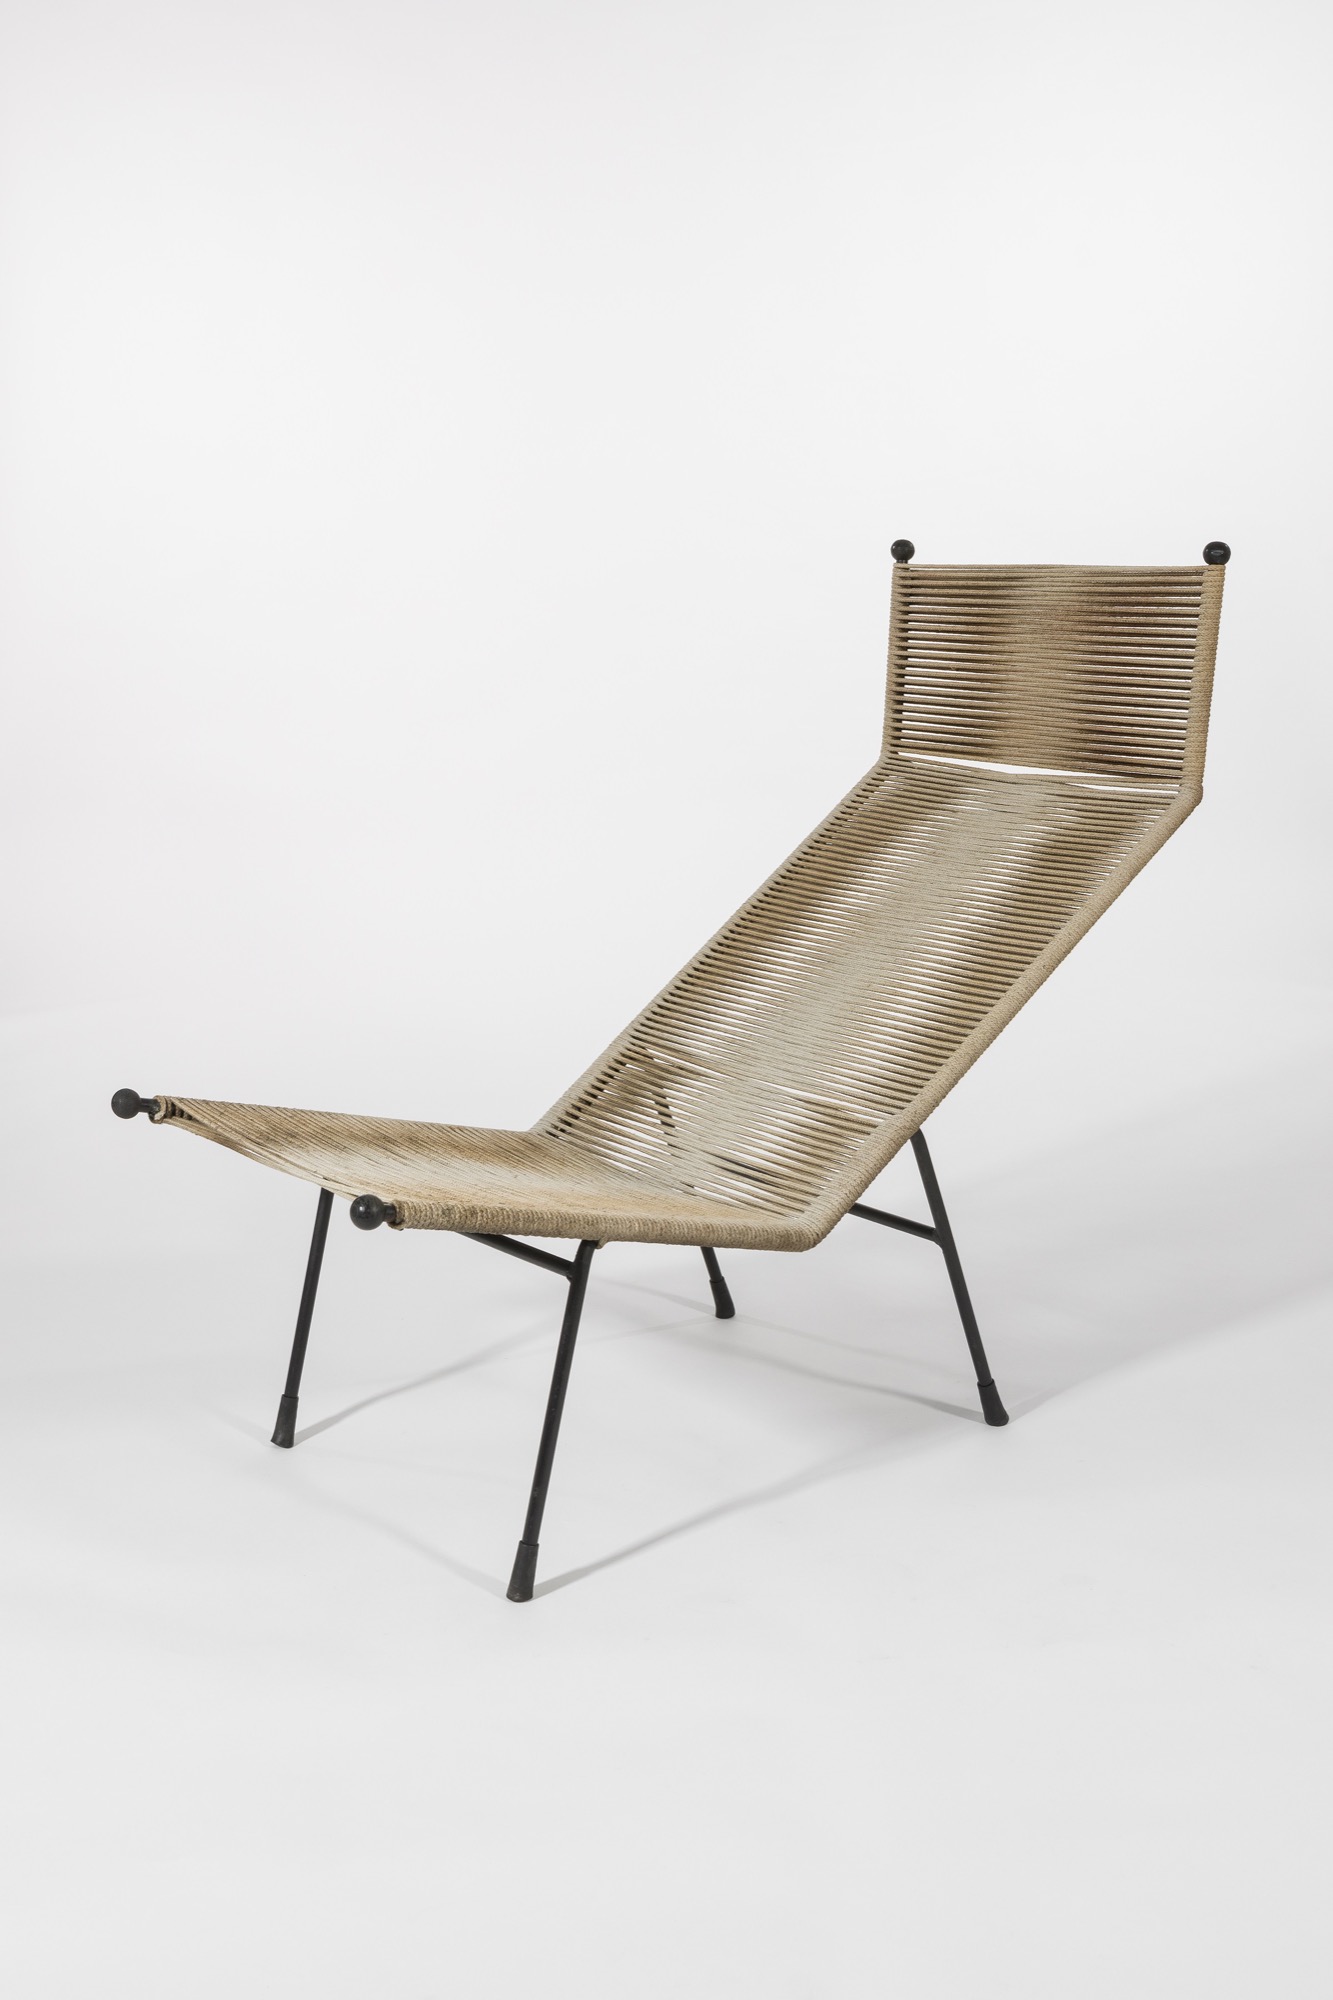 Clement Meadmore, <em>Reclining chair</em>, 1953, steel, cotton cord, rubber. Conor Lyon Collection.